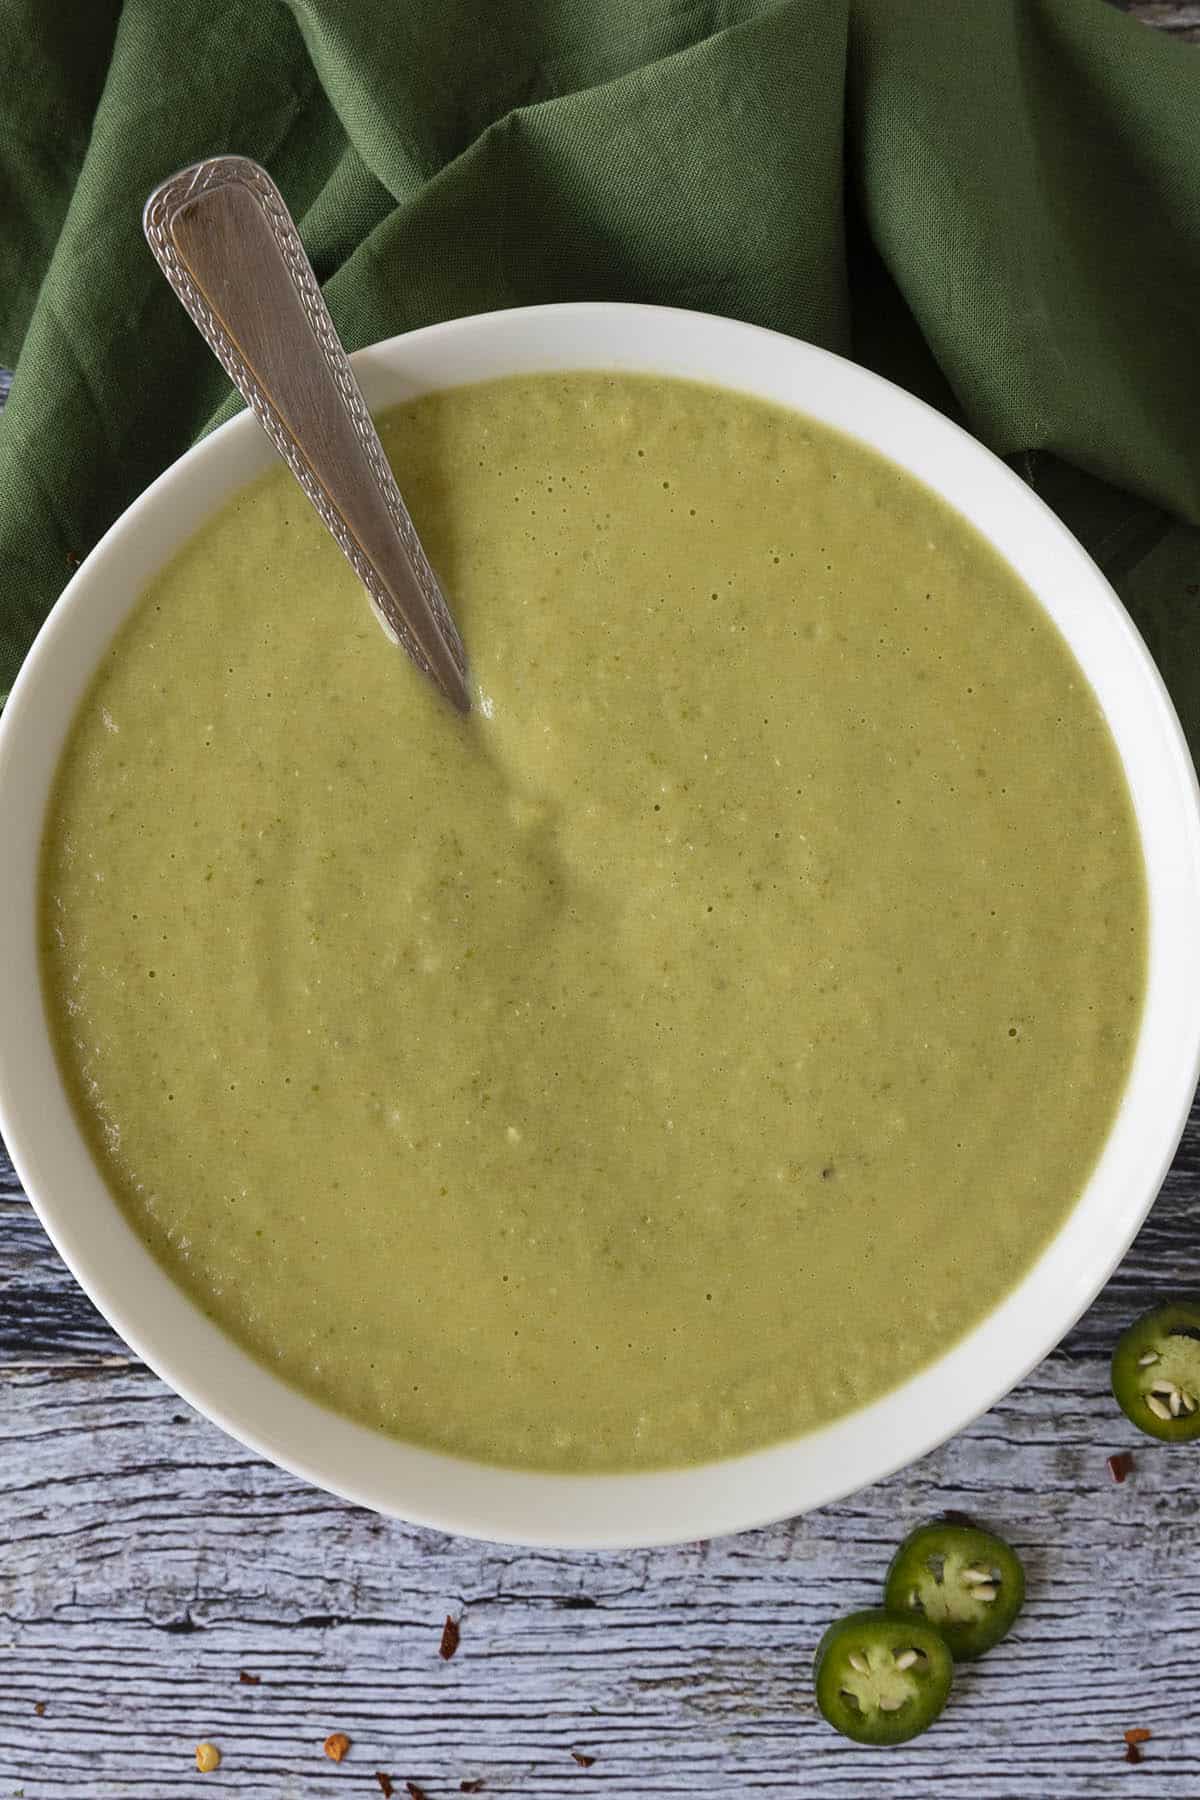 Creamy Jalapeno Sauce in a bowl